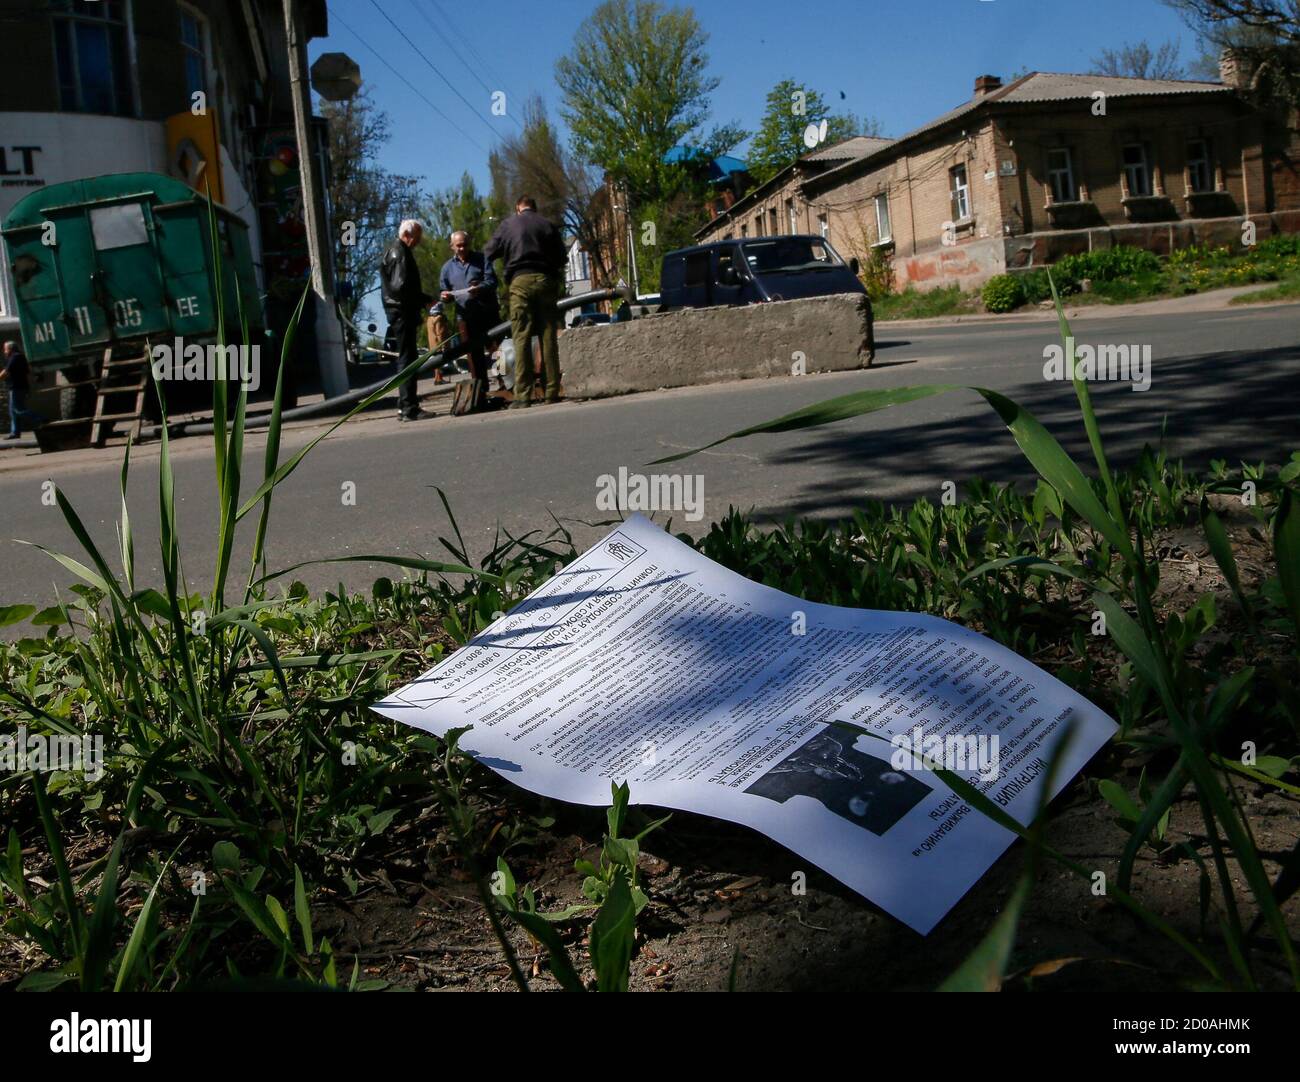 A leaflet, dropped from a Ukrainian helicopter, is seen in Slaviansk April 25, 2014. Ukrainian Prime Minister Arseny Yatseniuk accused Russia on Friday of wanting to start World War Three by occupying Ukraine 'militarily and politically'.  REUTERS/Gleb Garanich  (UKRAINE - Tags: POLITICS CIVIL UNREST) Stock Photo